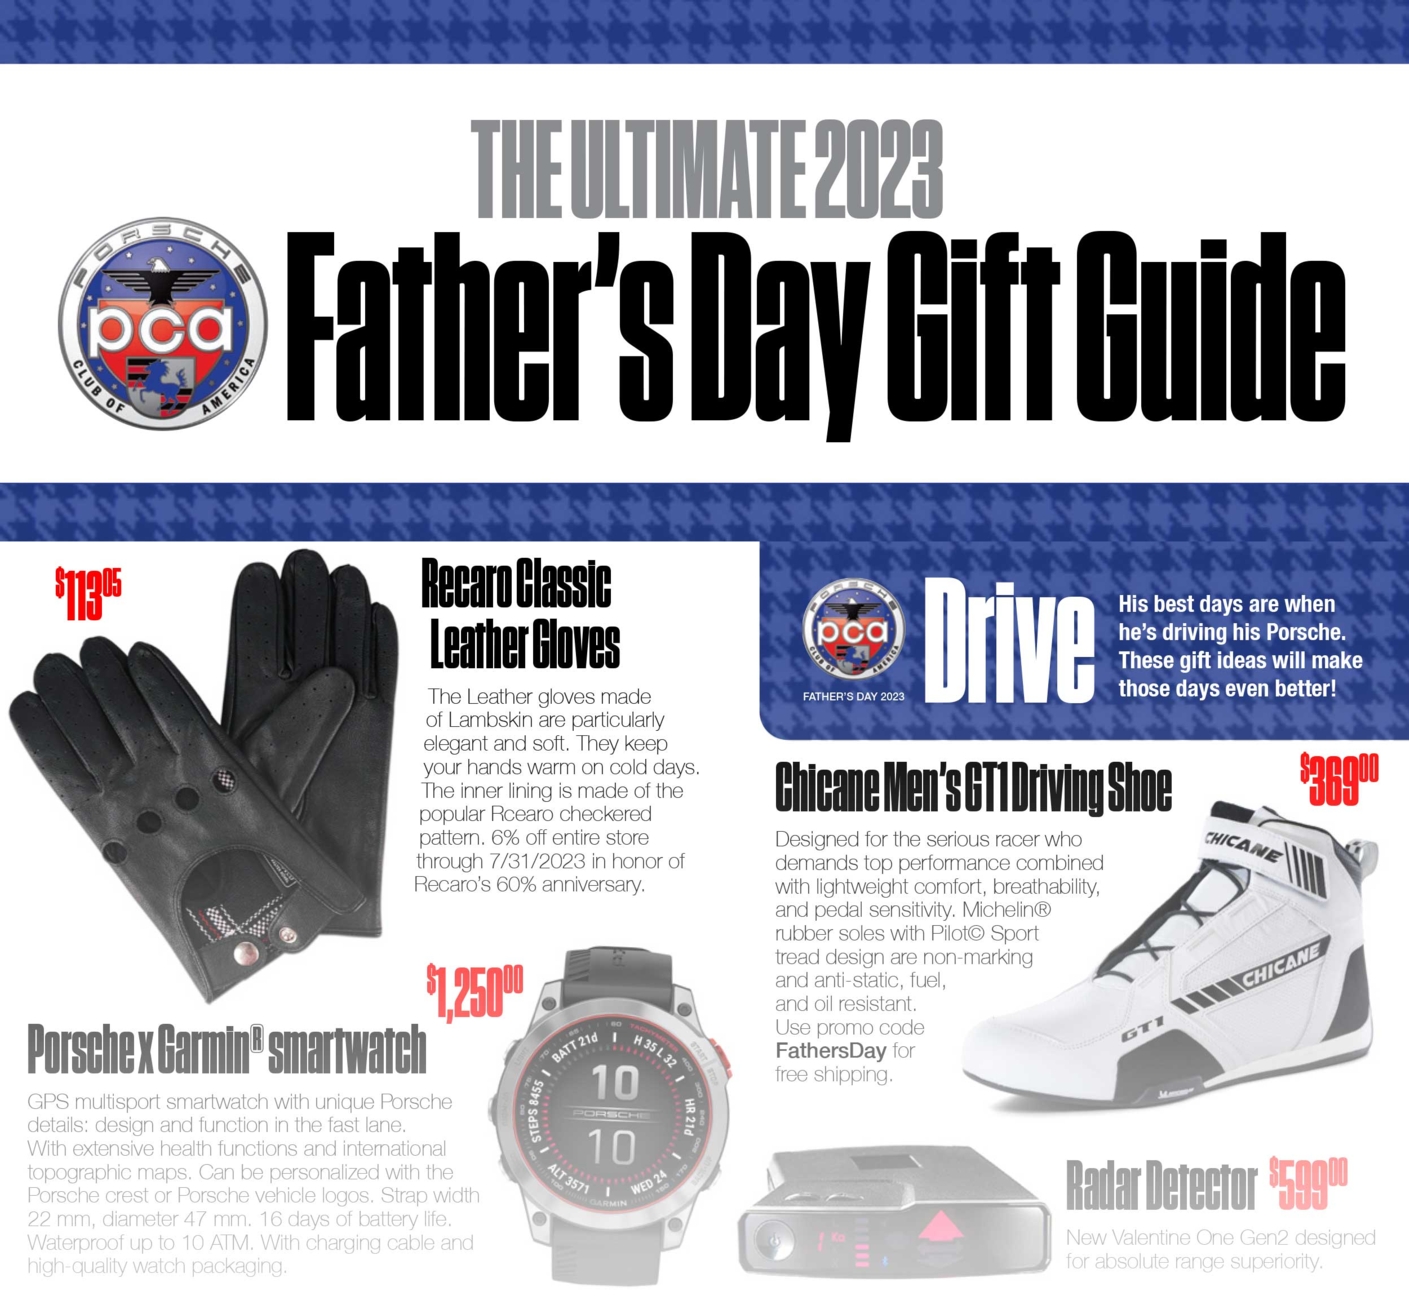 If your dad loves Porsche, check out our 2023 Father's Day gift guide